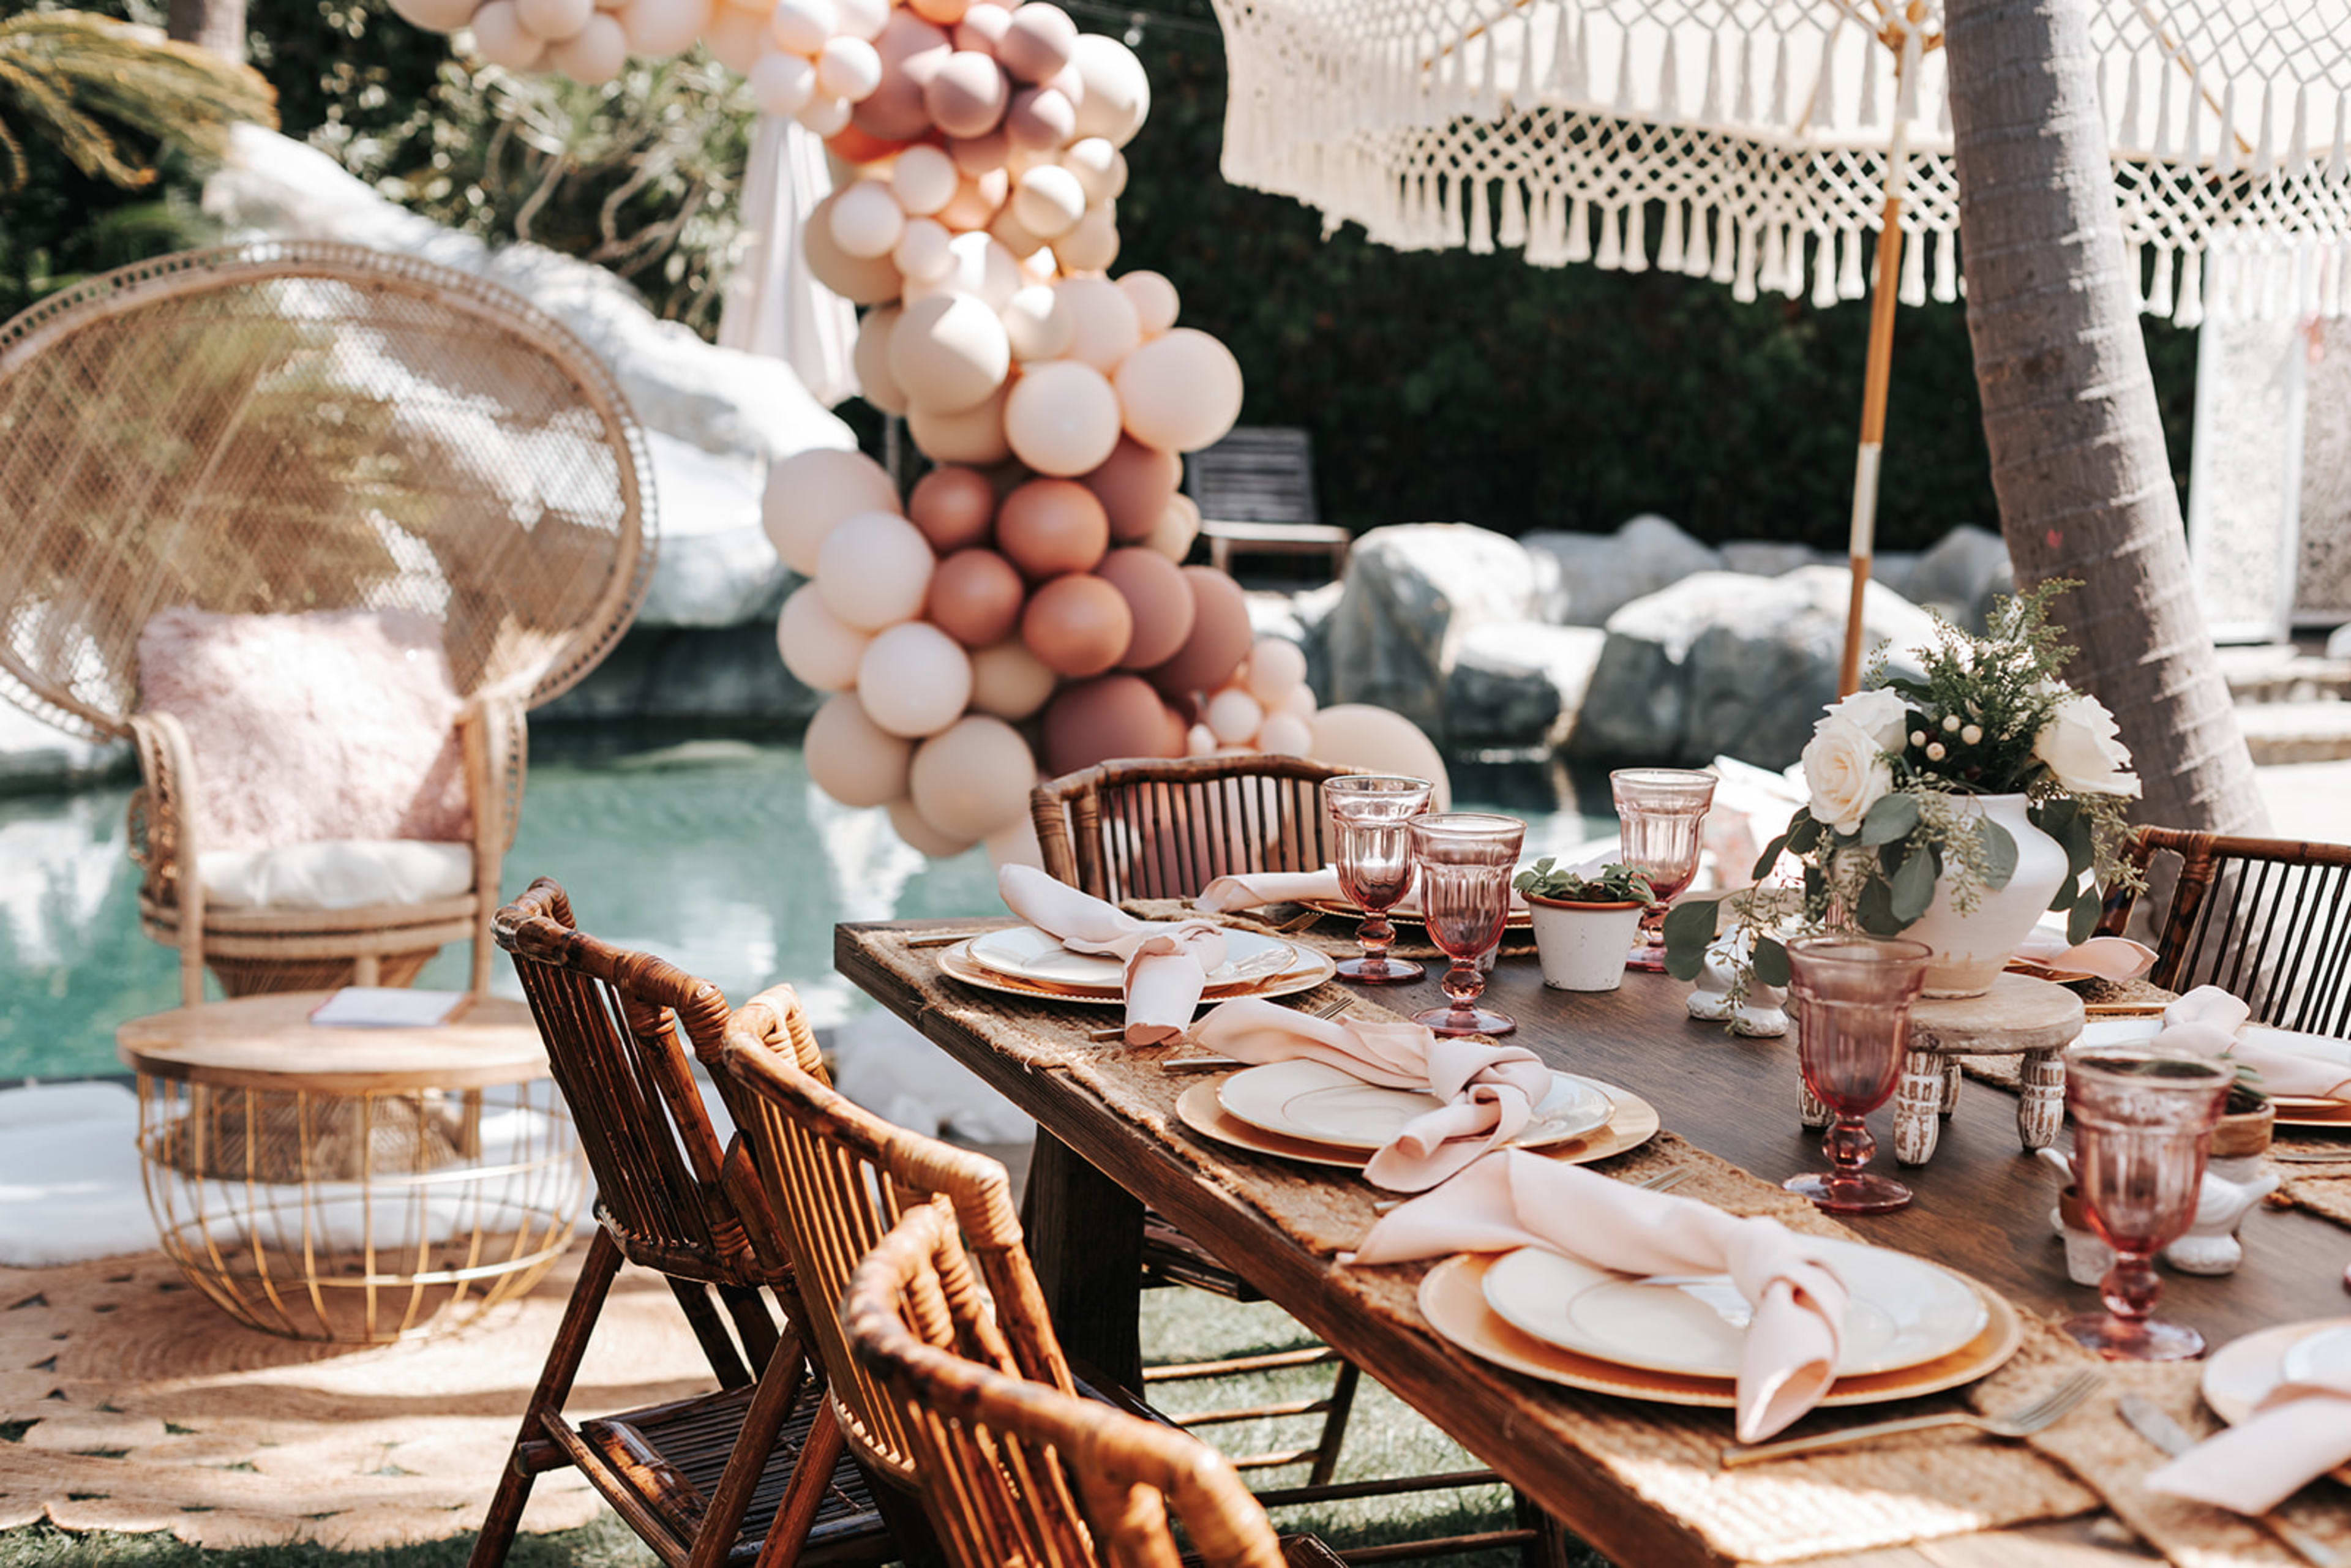 A boho table set for a party next to a pool.